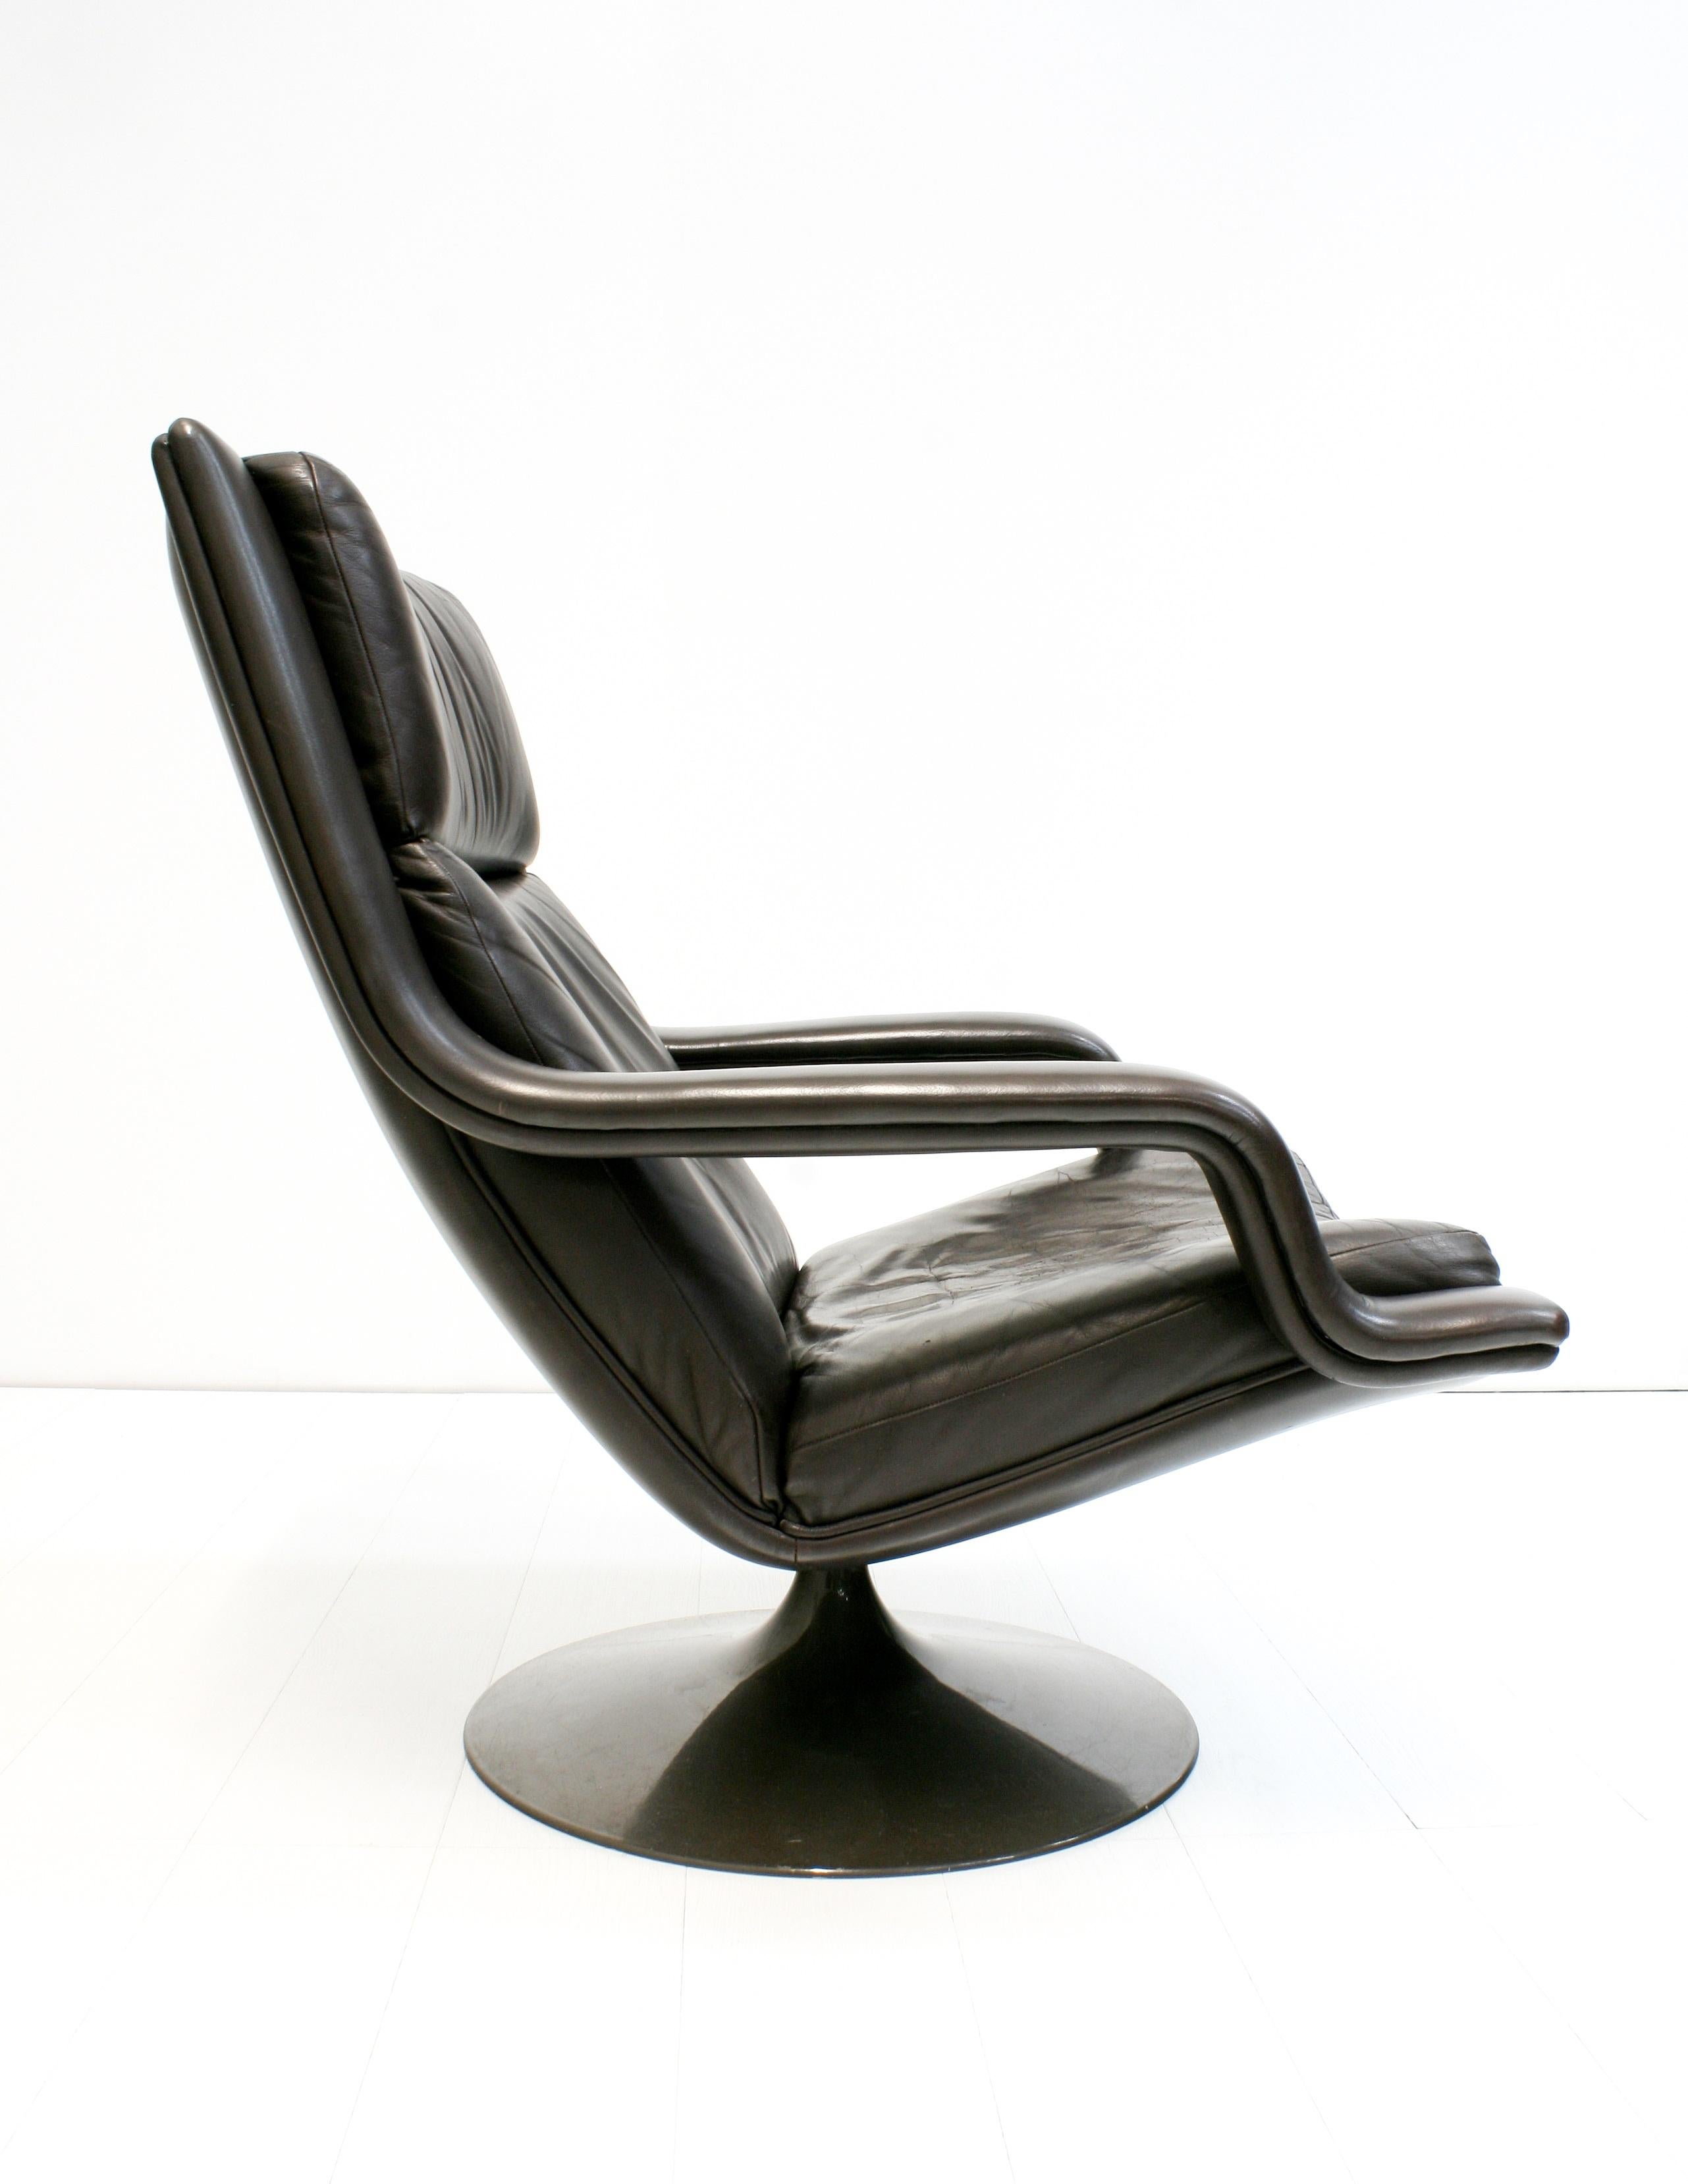 2 F152 Leather Swivel Lounge Chairs by Geoffrey D Harcourt for Artifort, 1970s For Sale 1